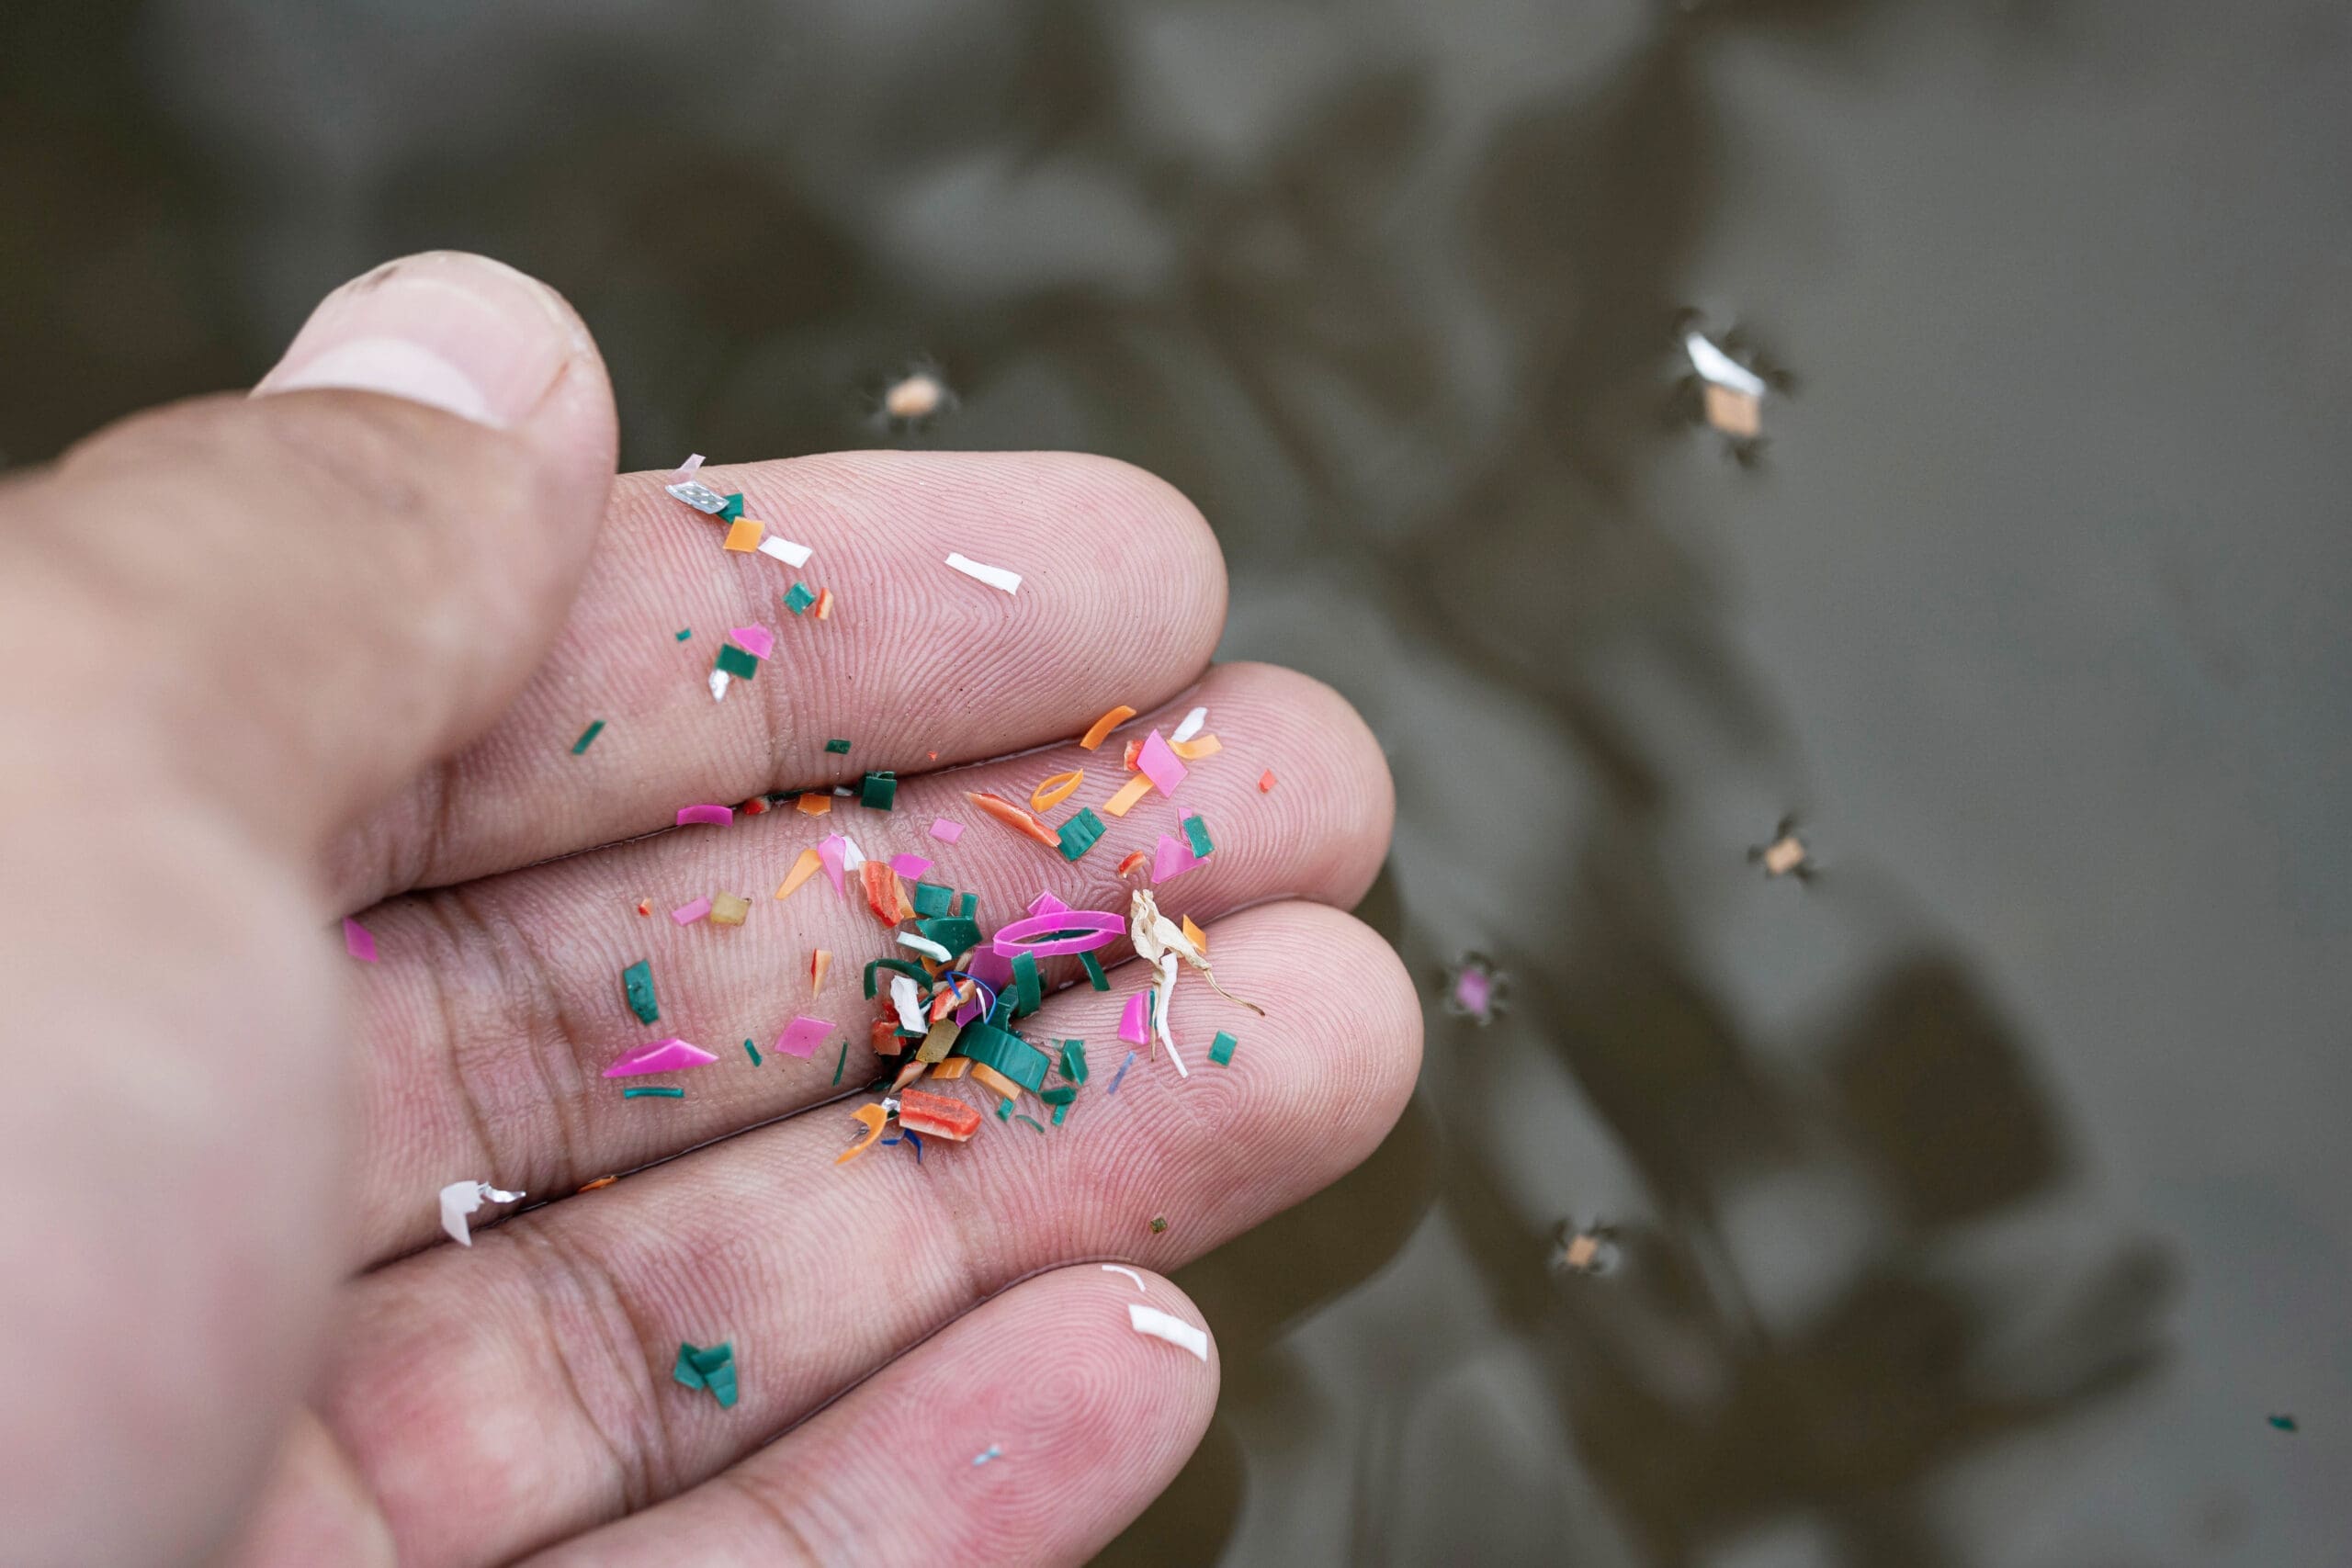 Are Microplastics Leading to Heart Problems?